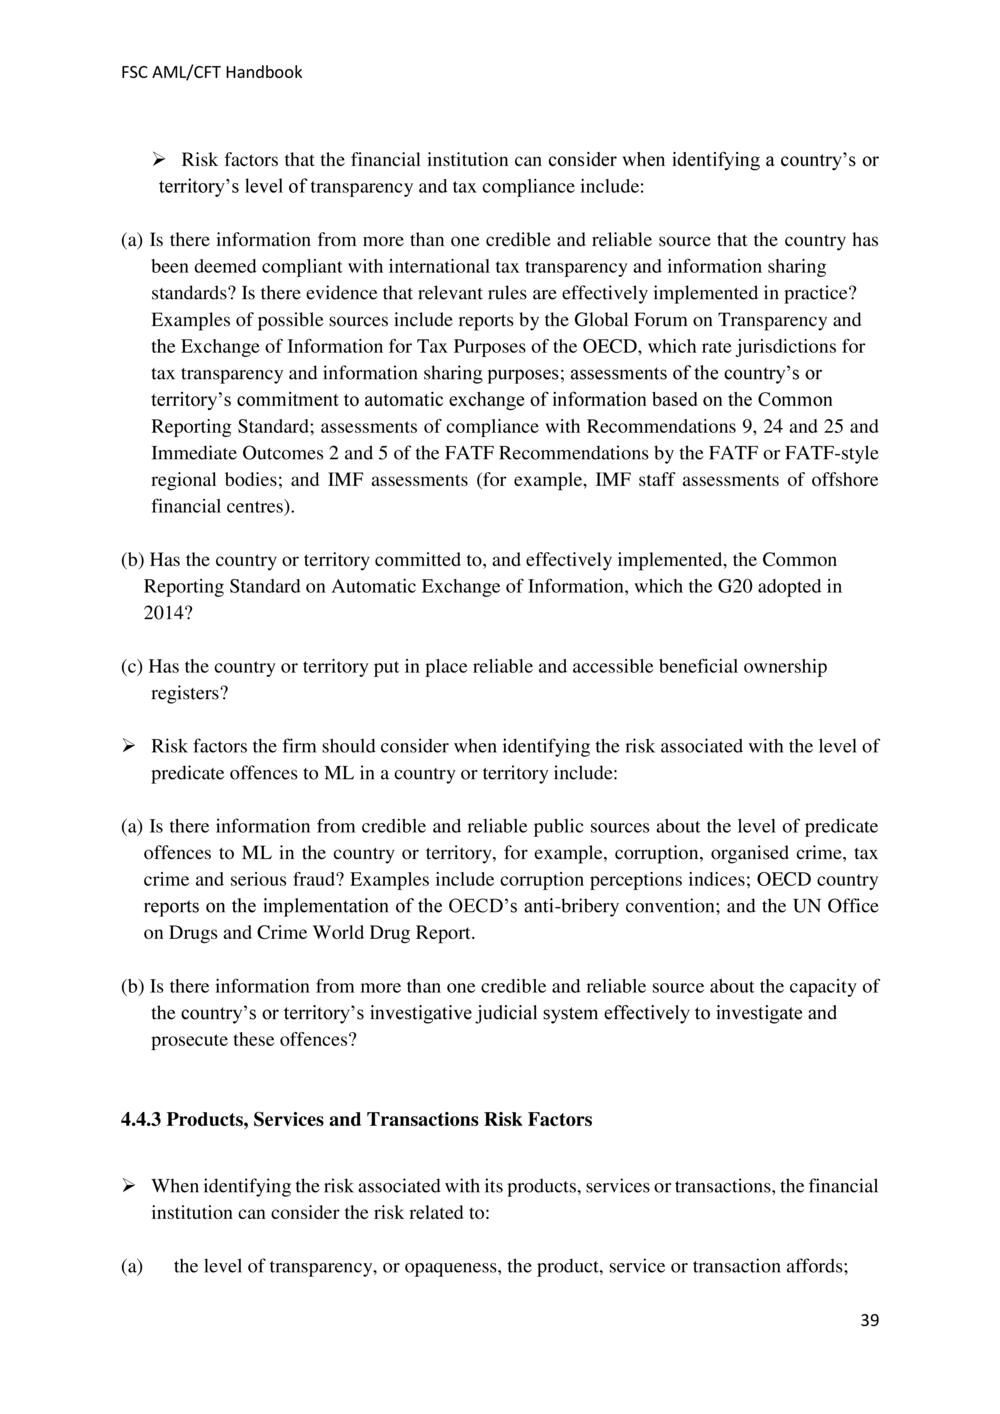 ANTI-MONEY LAUNDERING AND COUNTERING THE FINANCING OF TERRORISM HANDBOOK - FSC